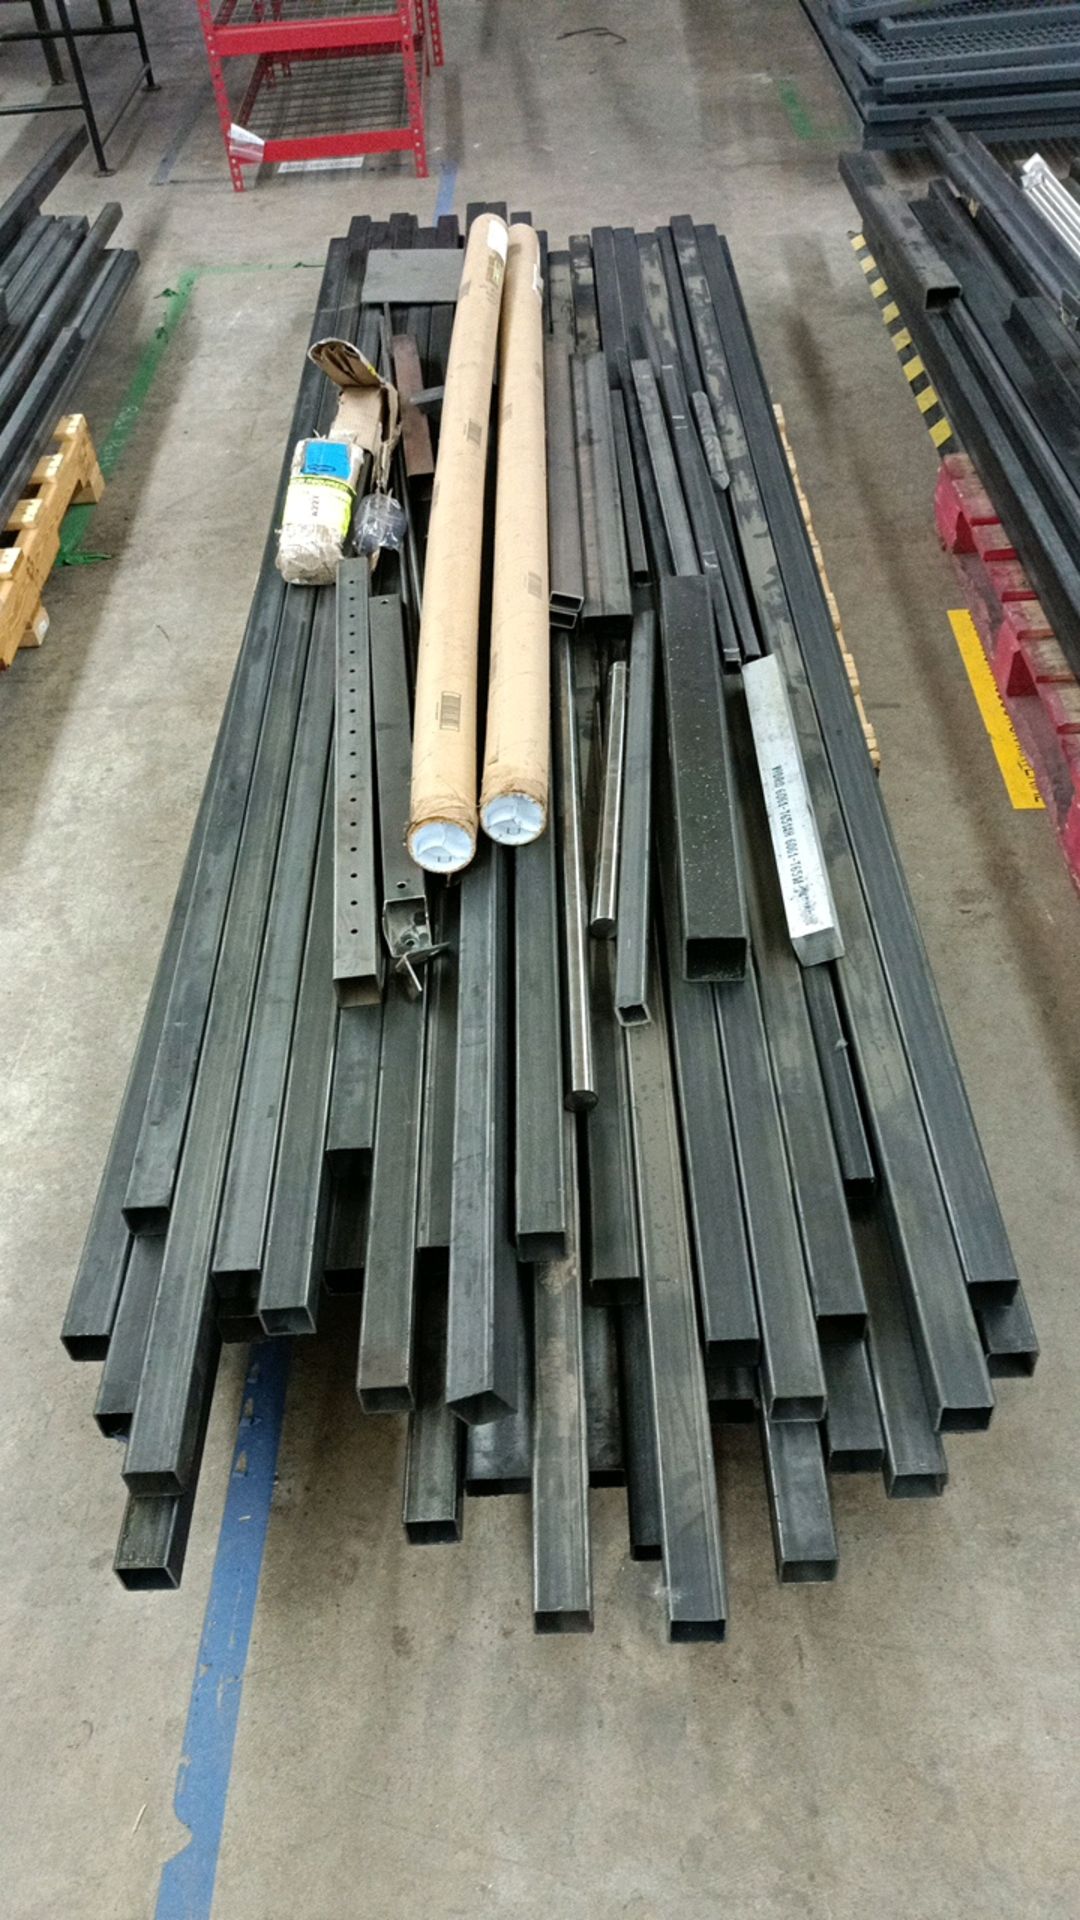 Assorted Size Steel Sheets and Bar Stock - Image 9 of 11